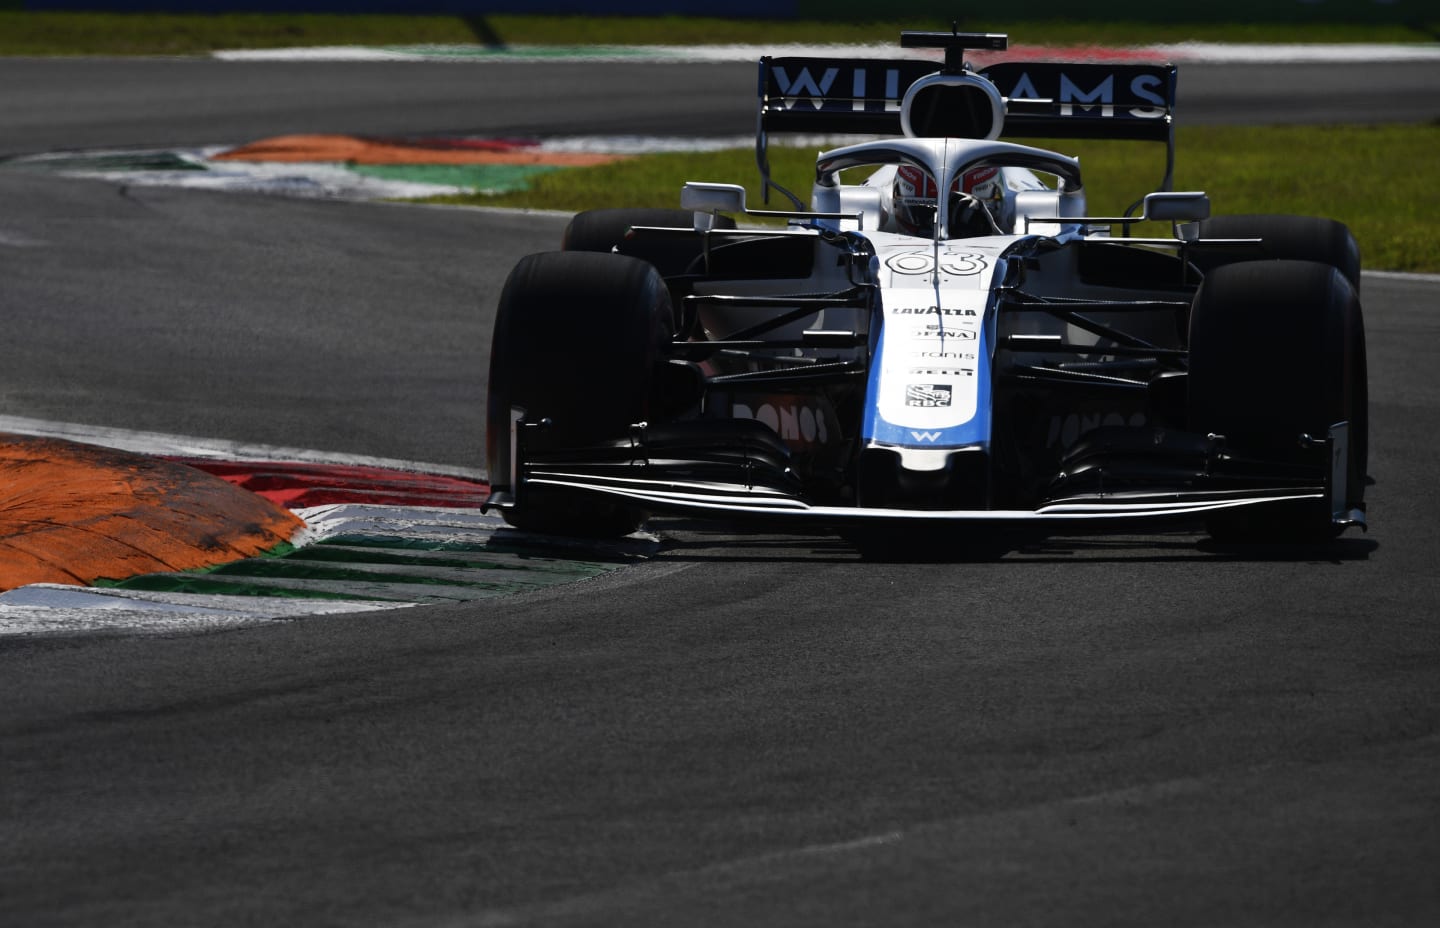 MONZA, ITALY - SEPTEMBER 05: George Russell of Great Britain driving the (63) Williams Racing FW43 Mercedes on track during qualifying for the F1 Grand Prix of Italy at Autodromo di Monza on September 05, 2020 in Monza, Italy. (Photo by Rudy Carezzevoli/Getty Images)